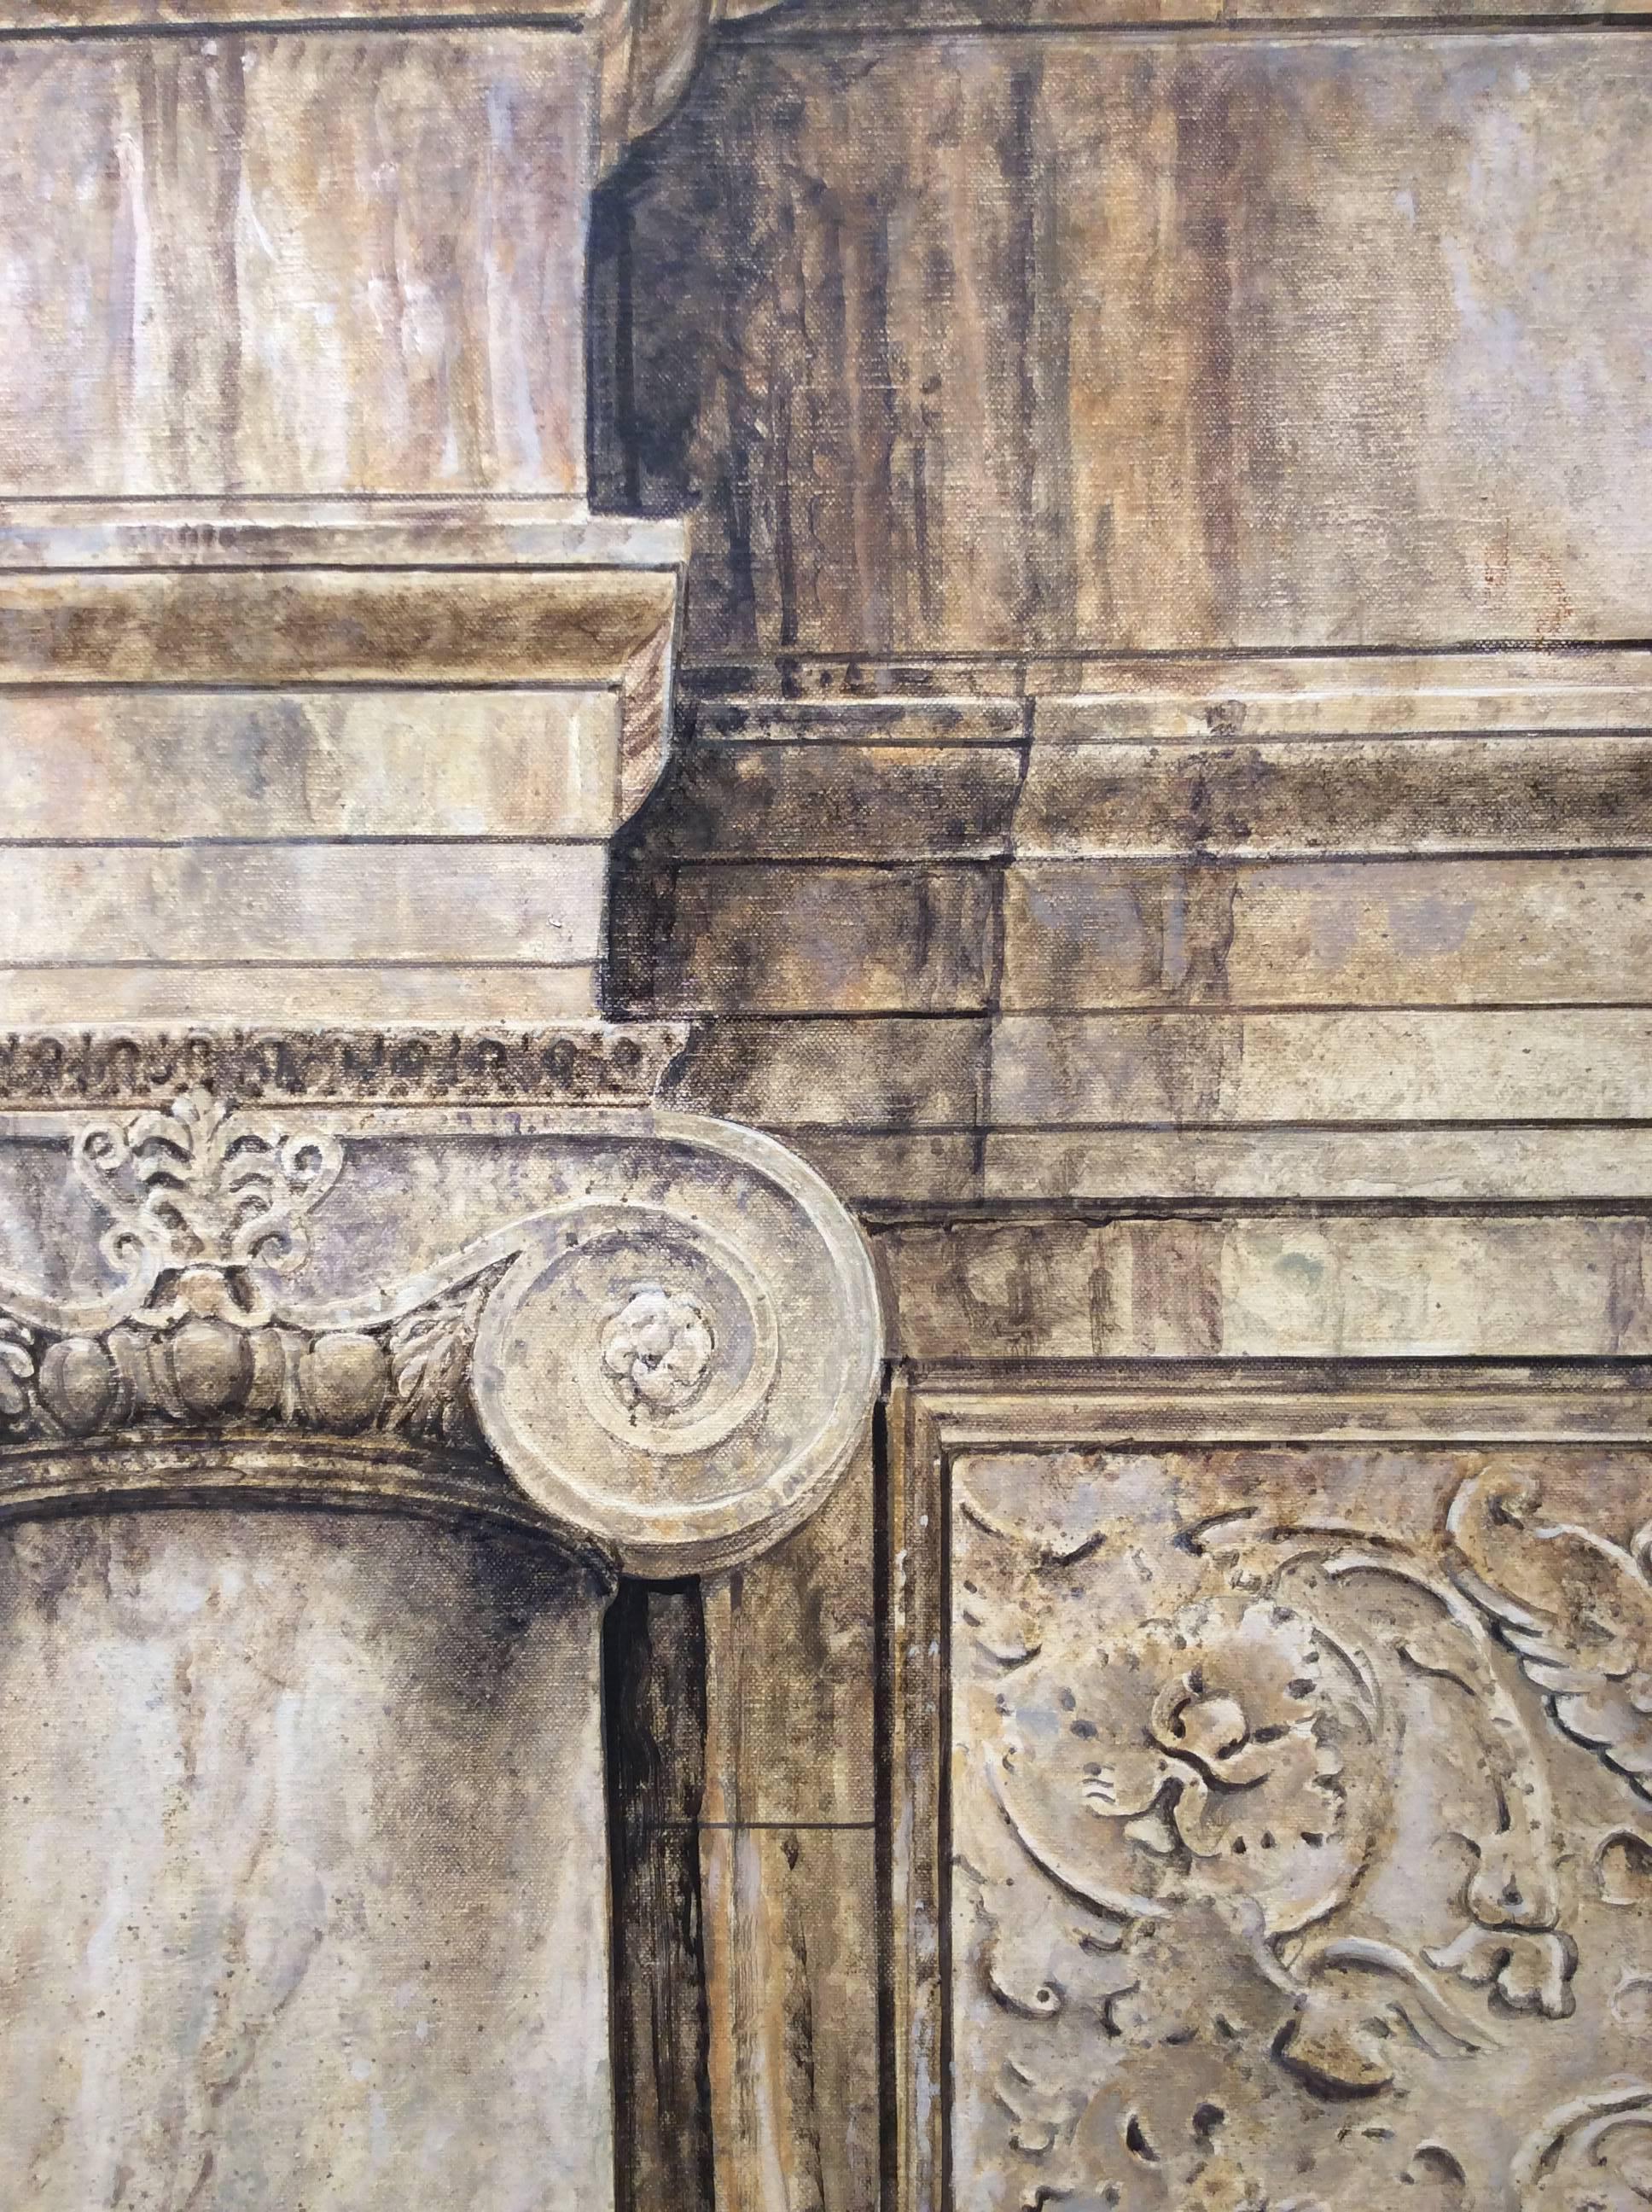 30 x 40 inches
horizontal photo realist oil painting on canvas of neo-classical architecture 

Mr. Britell's subject matter is drawn from the world of pre-modernist architecture. What he focuses on are brick facades, stonework structures and the